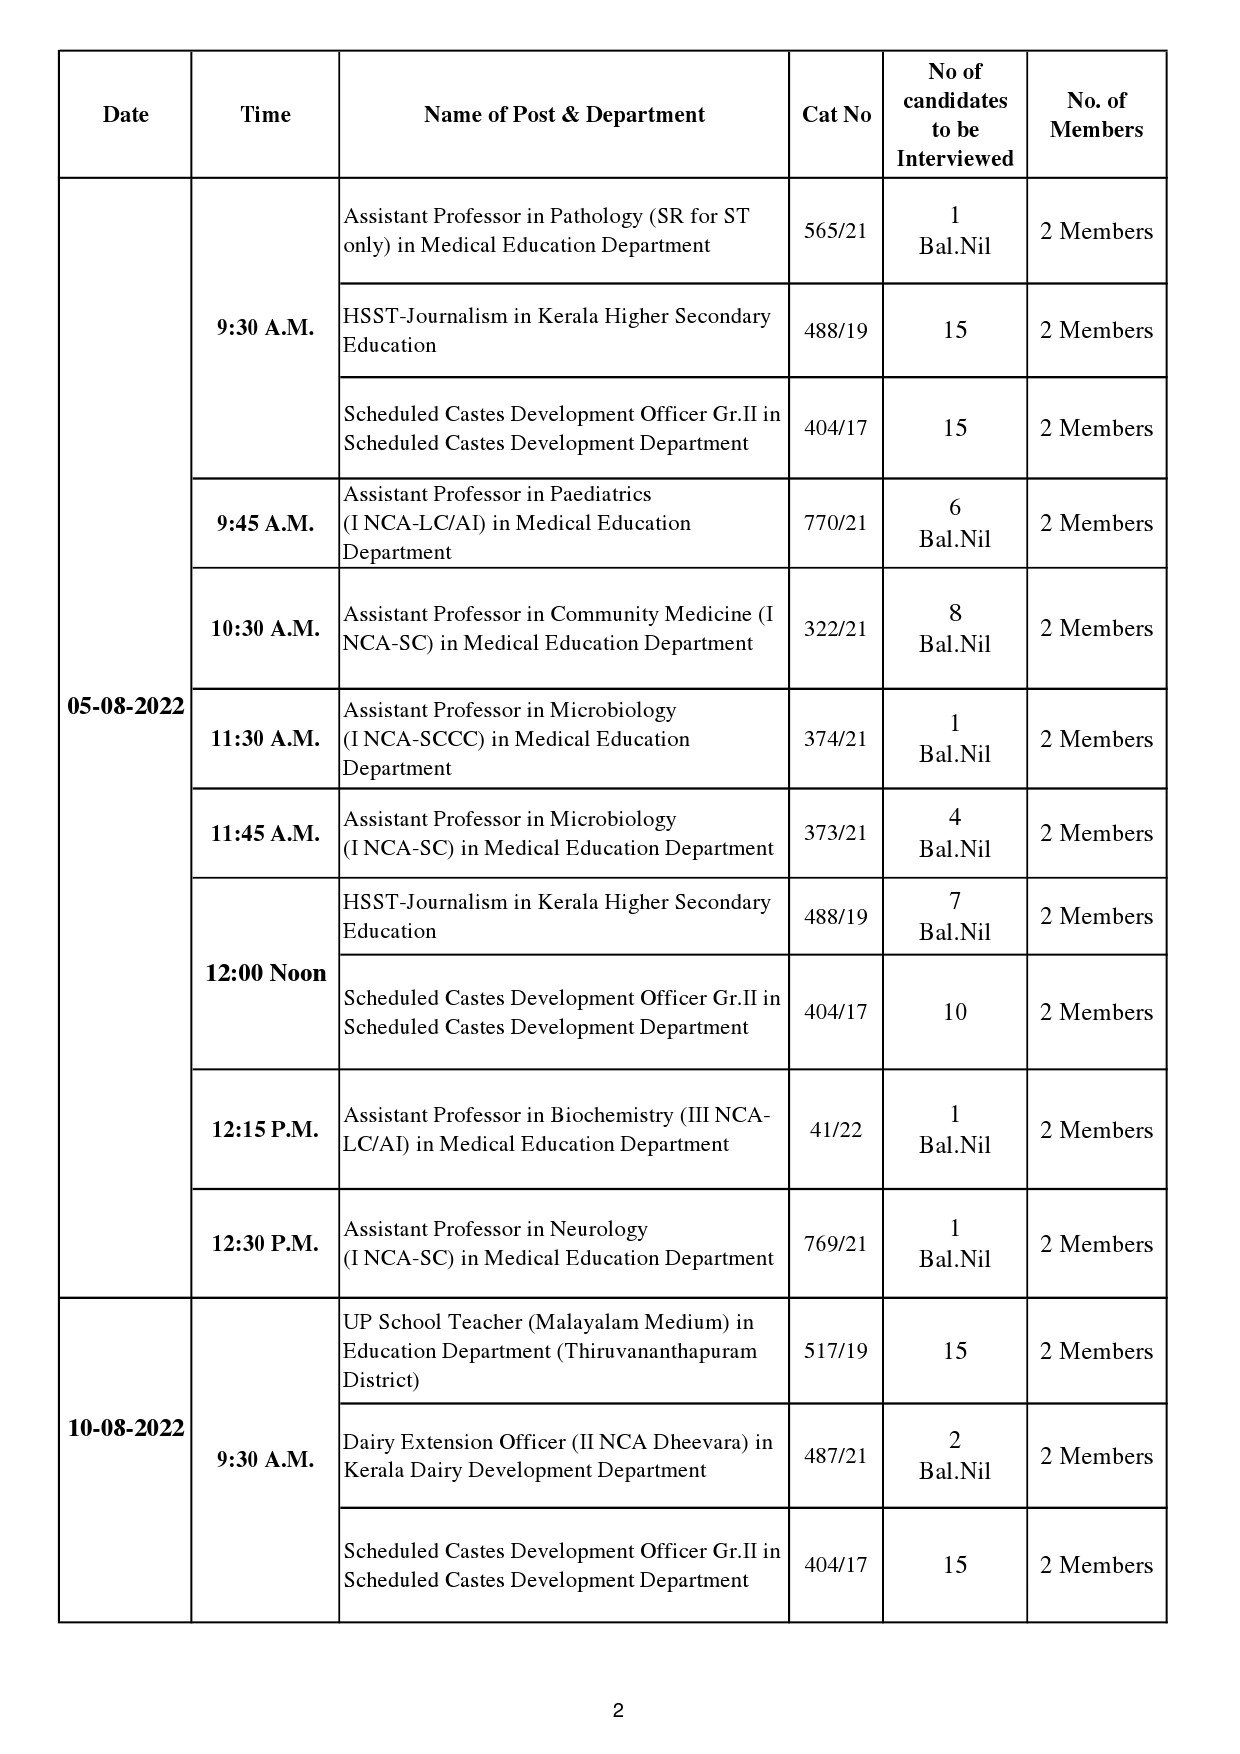 Interview Programme For The Month Of August 2022 - Notification Image 2